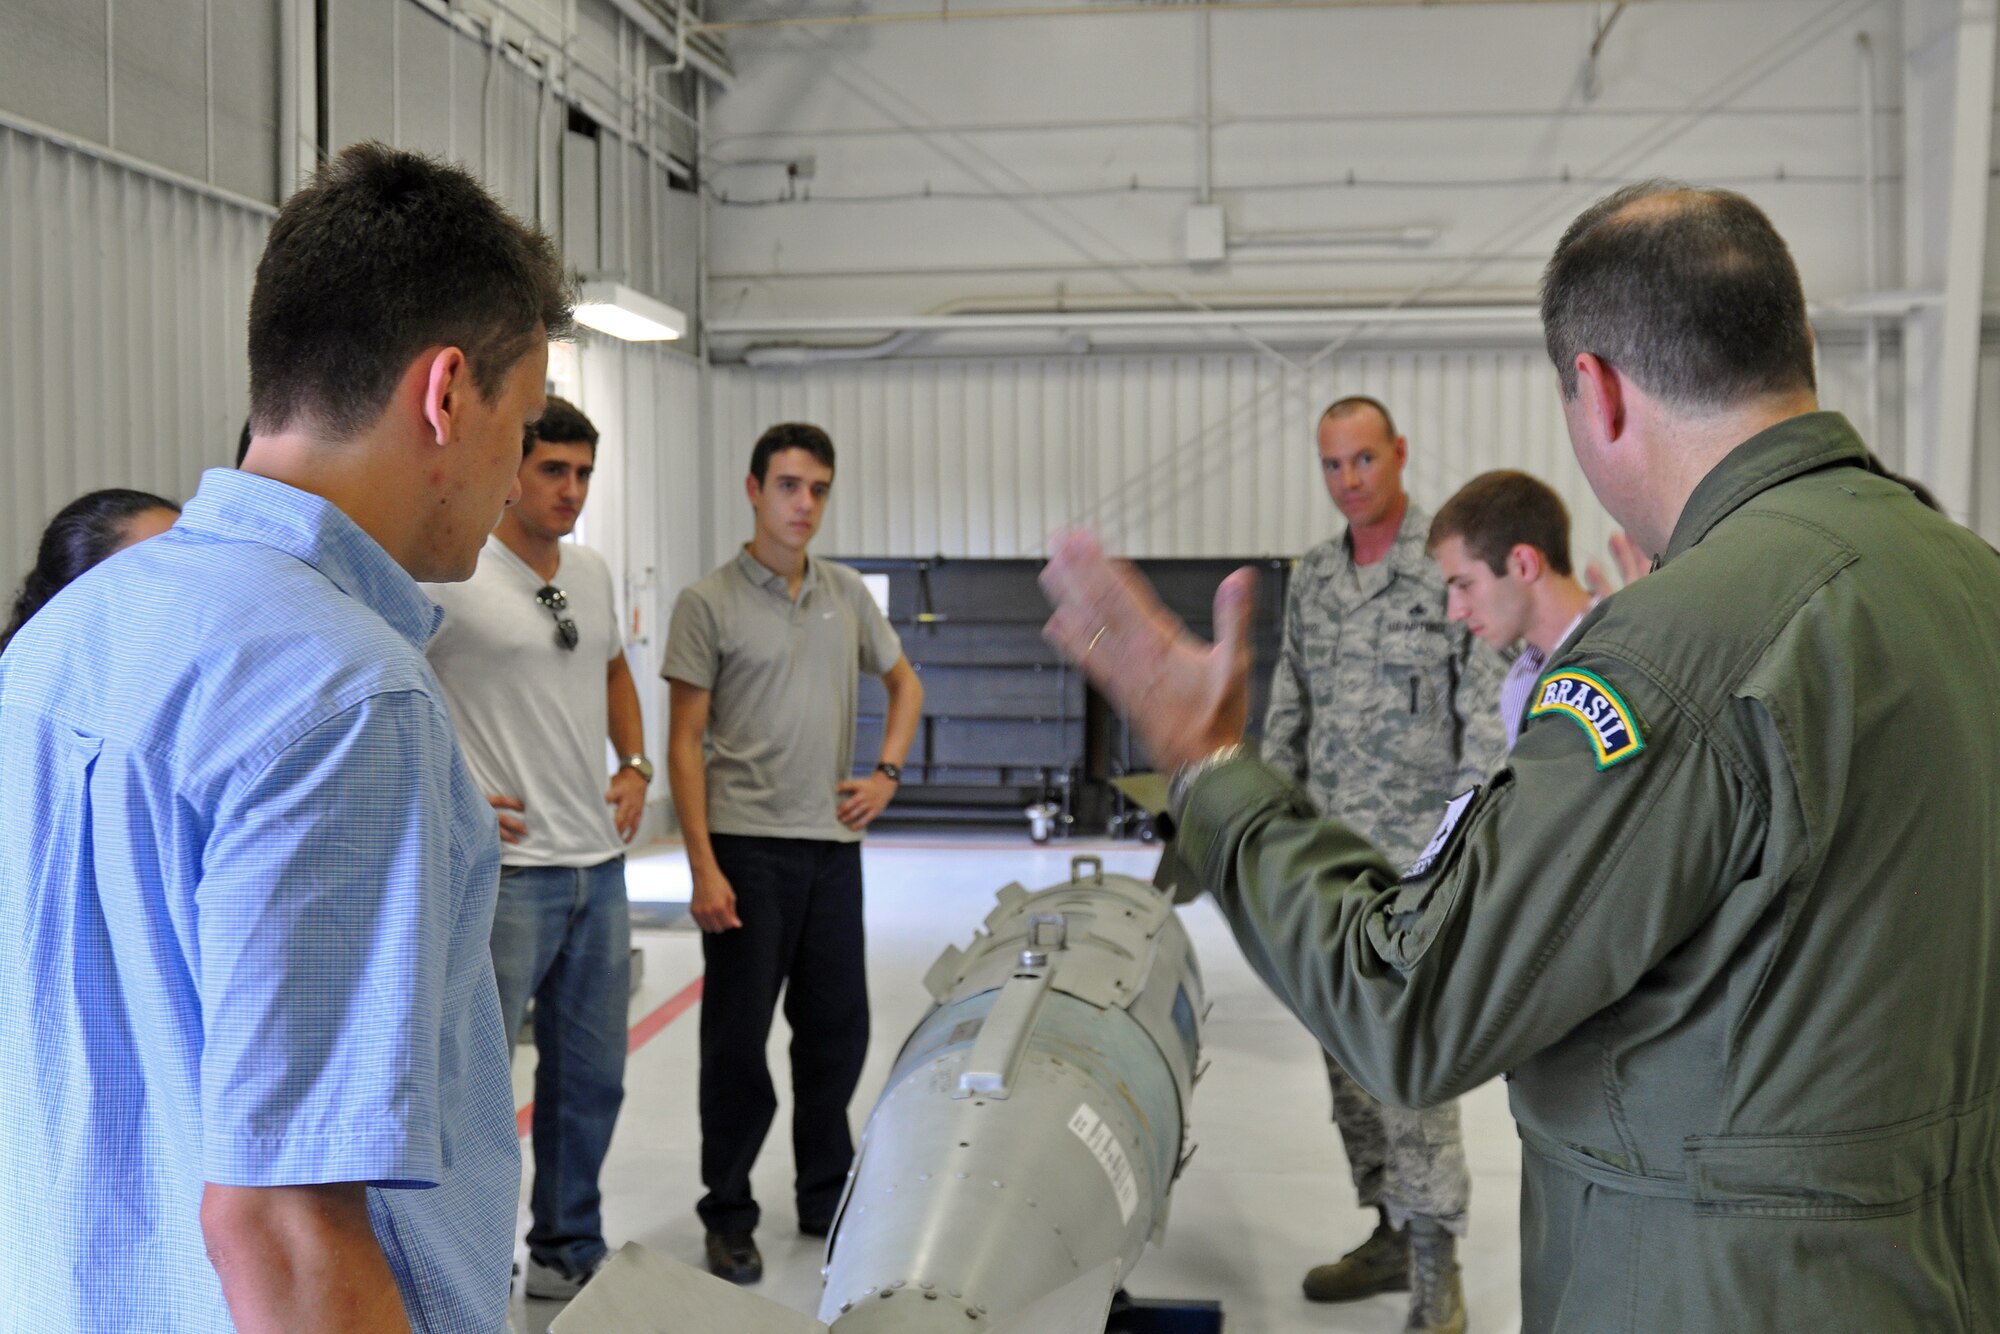 Col. Paulo Vasconcellos, Brazilian Air Force liaison officer to Headquarters Twelfth Air Force (Air Forces Southern), discusses the Joint Direct Attack Munition GBU-31 bomb with graduate and doctoral engineering students from Brazil during a visit to Davis-Monthan Air Force Base, July 24. The students were in Tucson, Ariz., visiting the nearby Raytheon Company as part of Brazil’s Science Without Borders program and requested the opportunity to visit D-M.  The GBU-31 is the largest version of the JDAM weighing in at approximately 2,000 pounds. (U.S. Air Force photo/Capt. Jonathan Simmons)